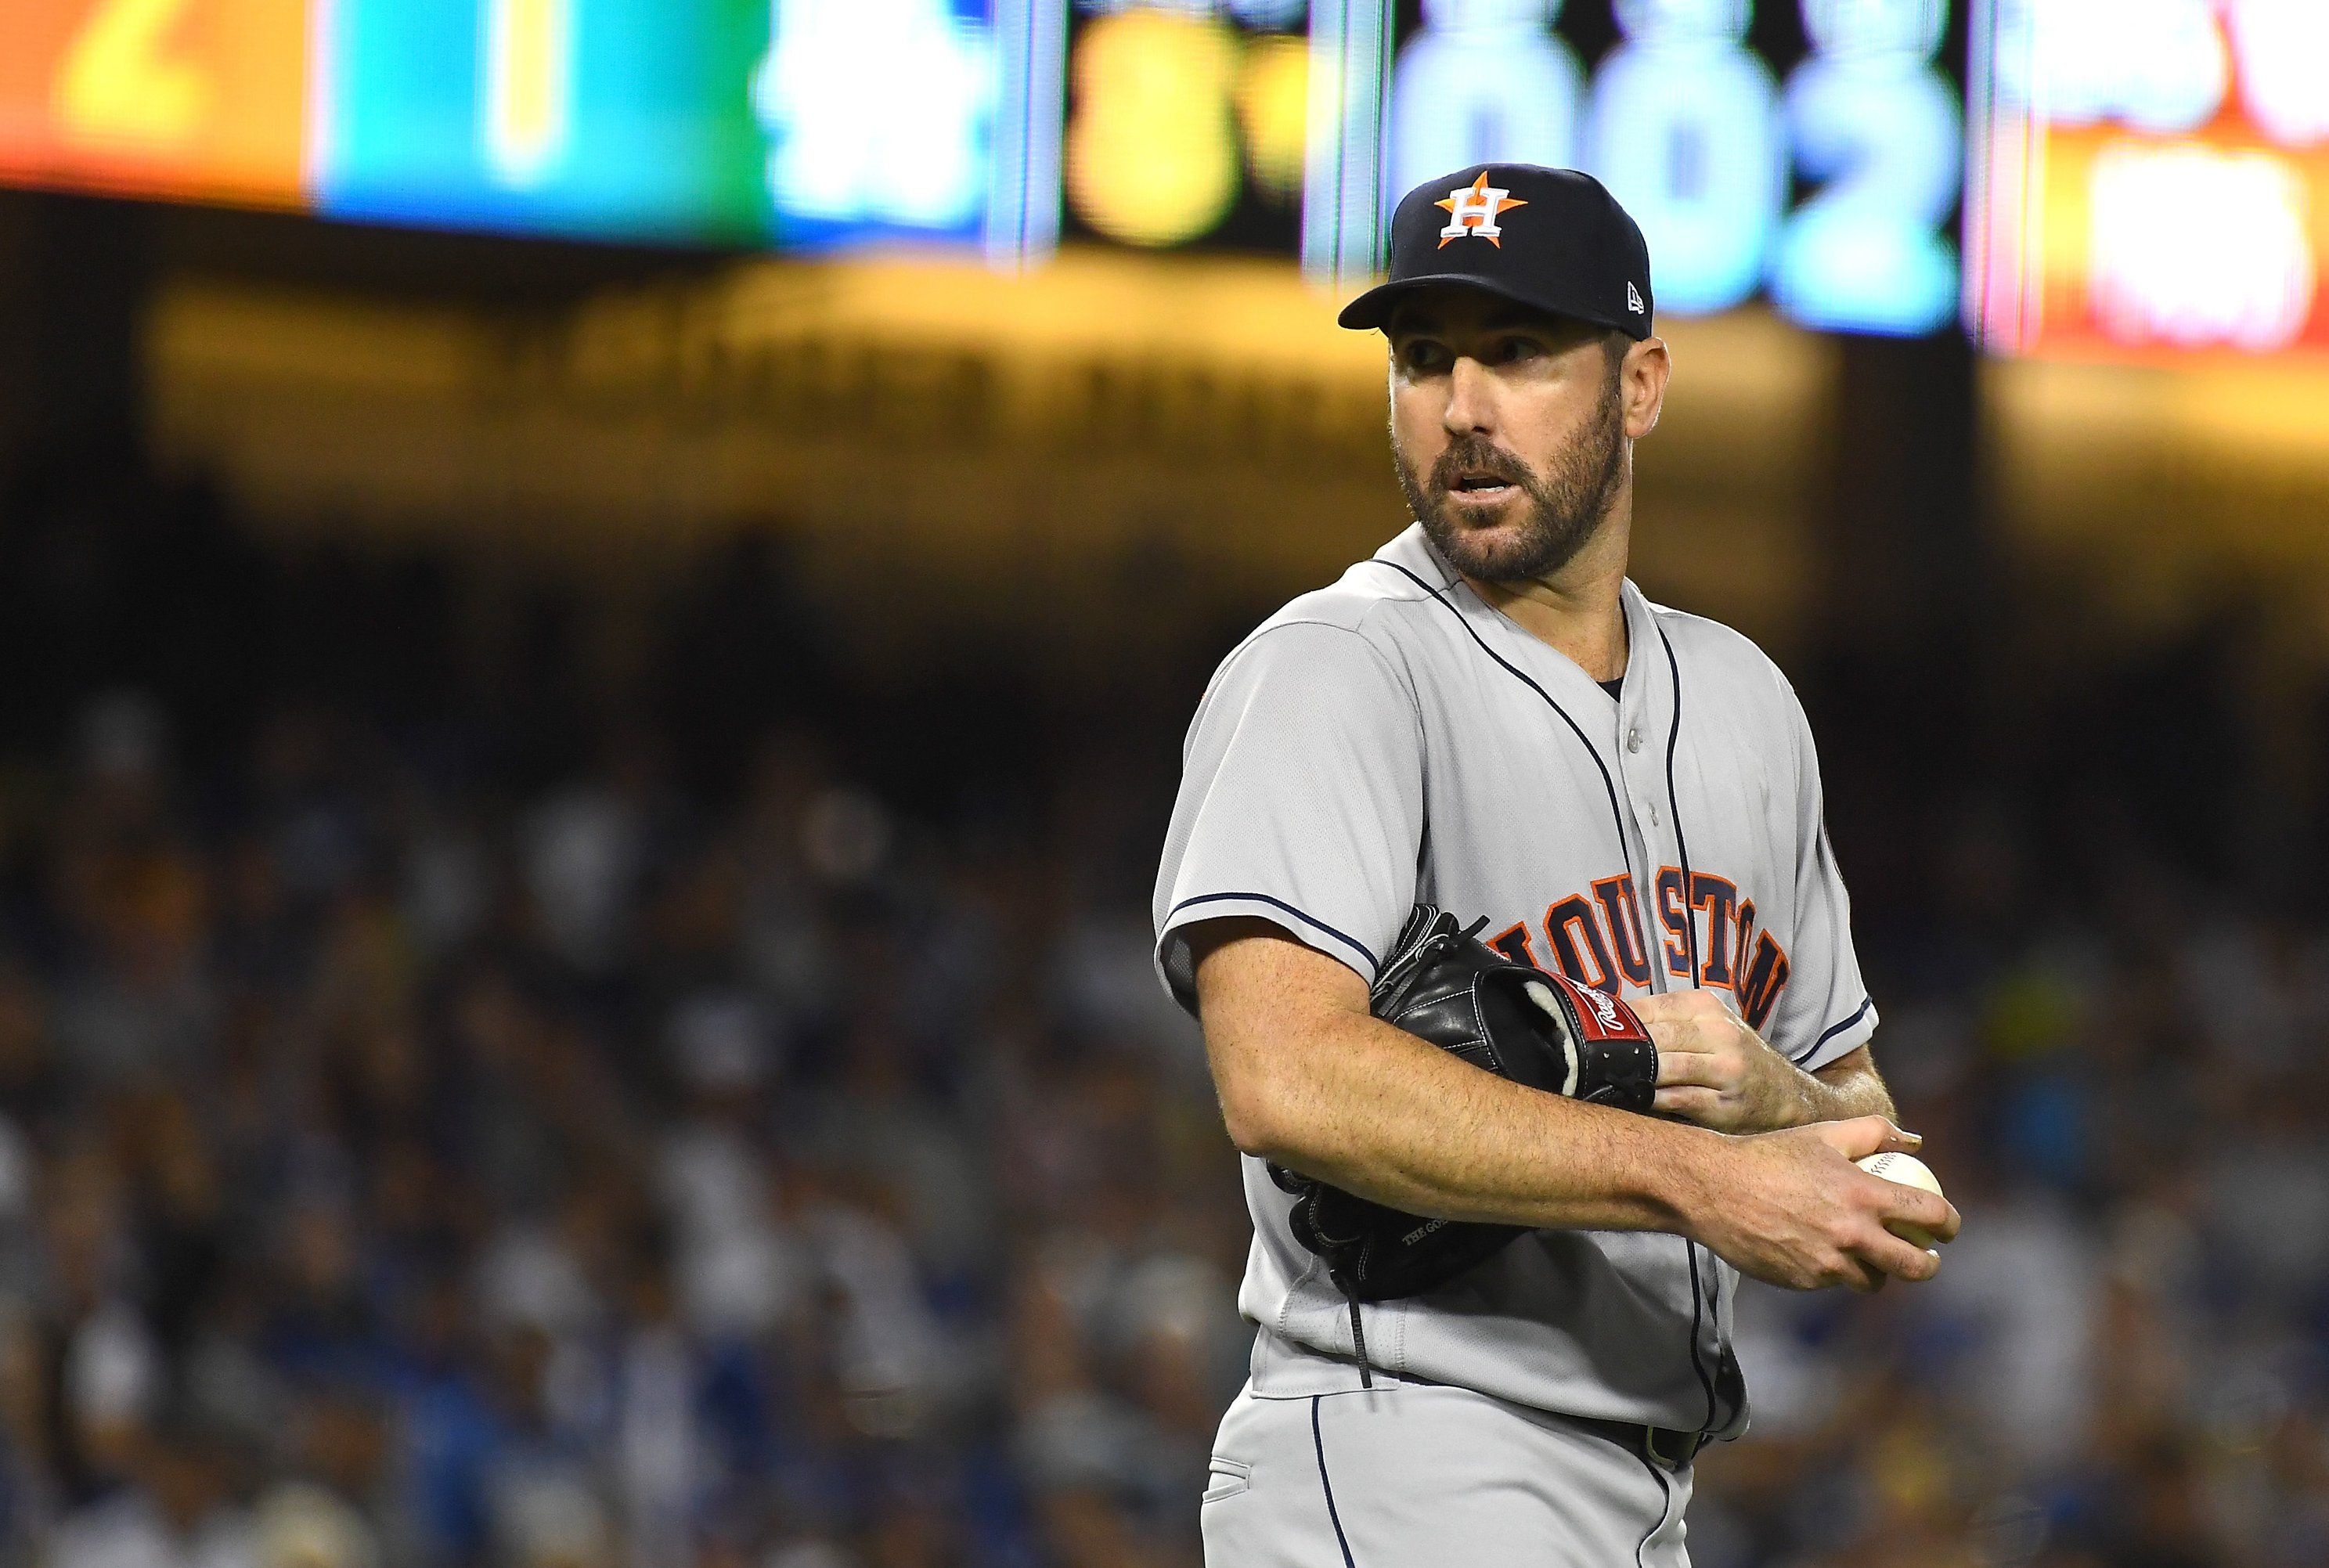 Detroit Tigers' Justin Verlander to have MRI on 'tight right groin